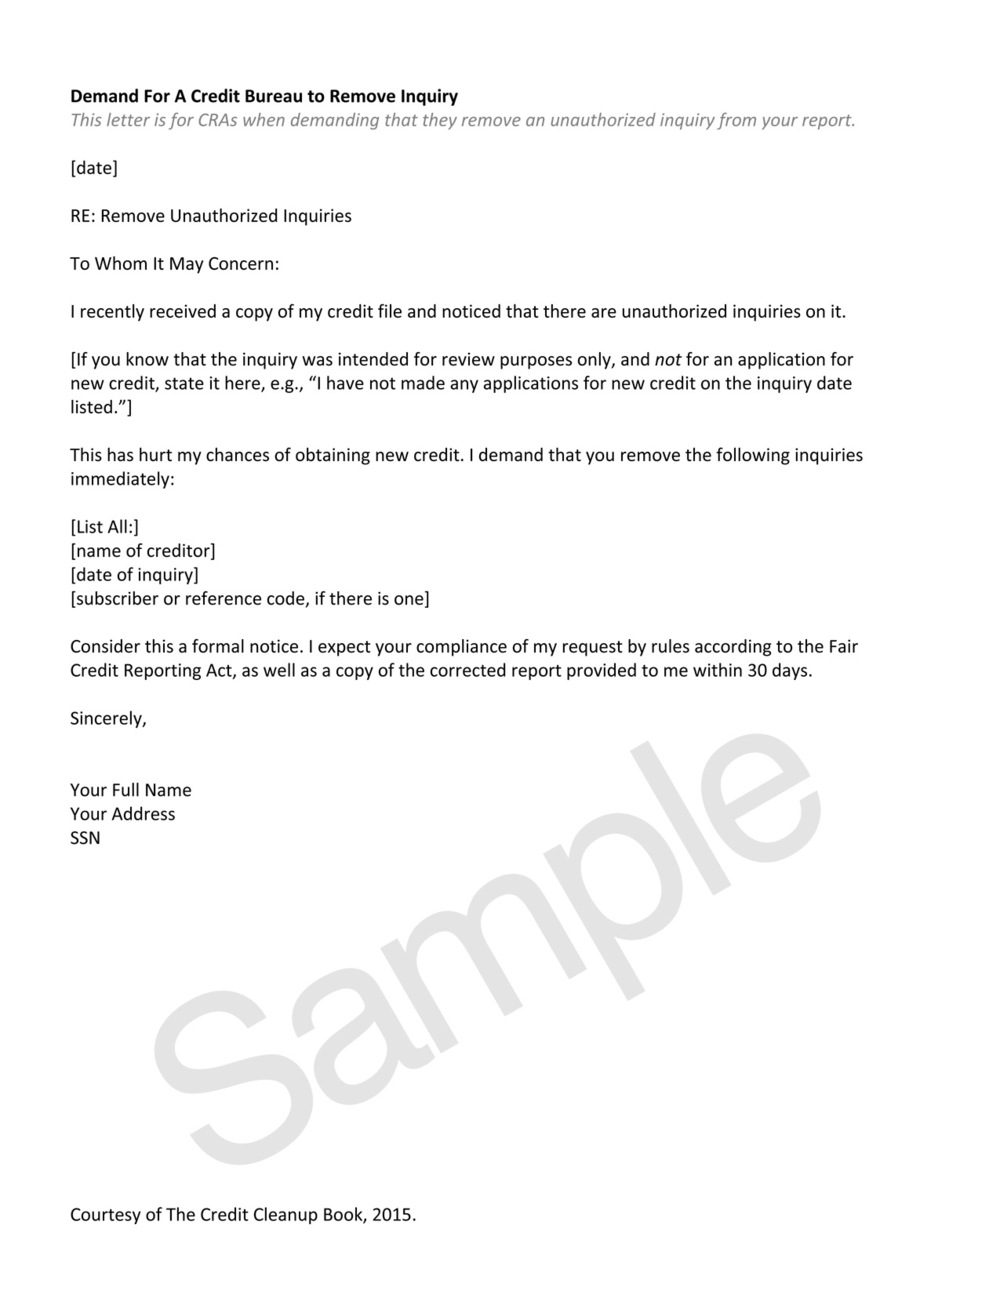 Sample Letter To Remove Inquiries From Credit Report